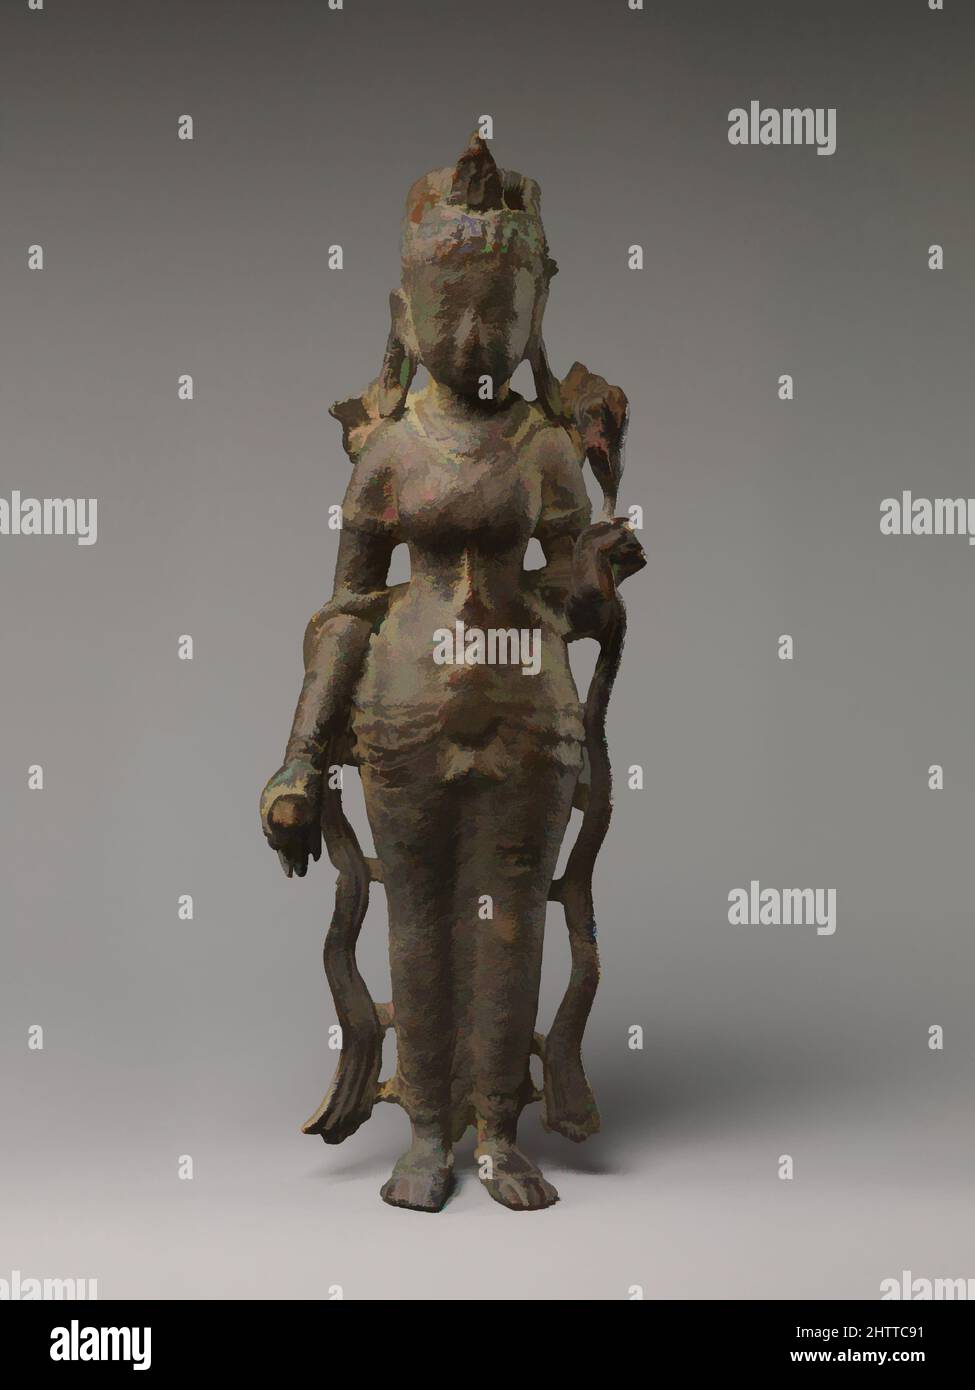 Art inspired by Tara, ca. 7th century, North India (possibly Uttar Pradesh), Copper alloy, H. 12 in. (30.5 cm), Sculpture, This elegant, full-bodied figure of a Buddhist saviouress holding a long-stemmed lotus suggests affiliations with Avalokiteshvara, the bodhisattva of compassion, Classic works modernized by Artotop with a splash of modernity. Shapes, color and value, eye-catching visual impact on art. Emotions through freedom of artworks in a contemporary way. A timeless message pursuing a wildly creative new direction. Artists turning to the digital medium and creating the Artotop NFT Stock Photo